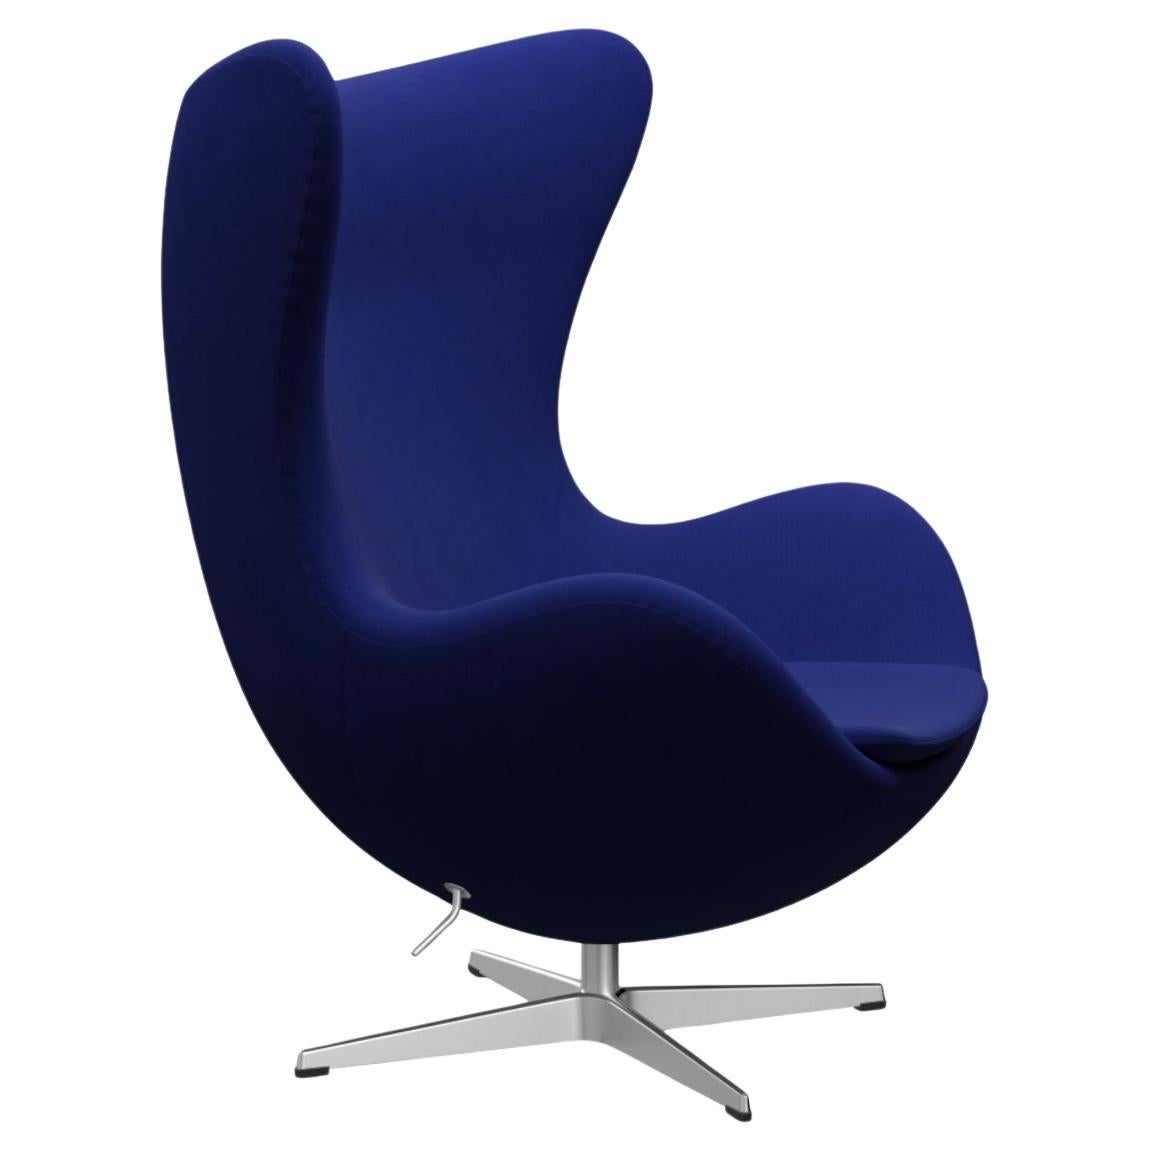 The Egg chair by Arne Jacobsen for Fritz Hansen, Blue, Denmark, 1958, 2000s.  Scalamandre ocelot throw cushion in main image is for display purposes only and is NOT included with chair.  

The Egg™ chair by Arne Jacobsen is masterpiece of Danish